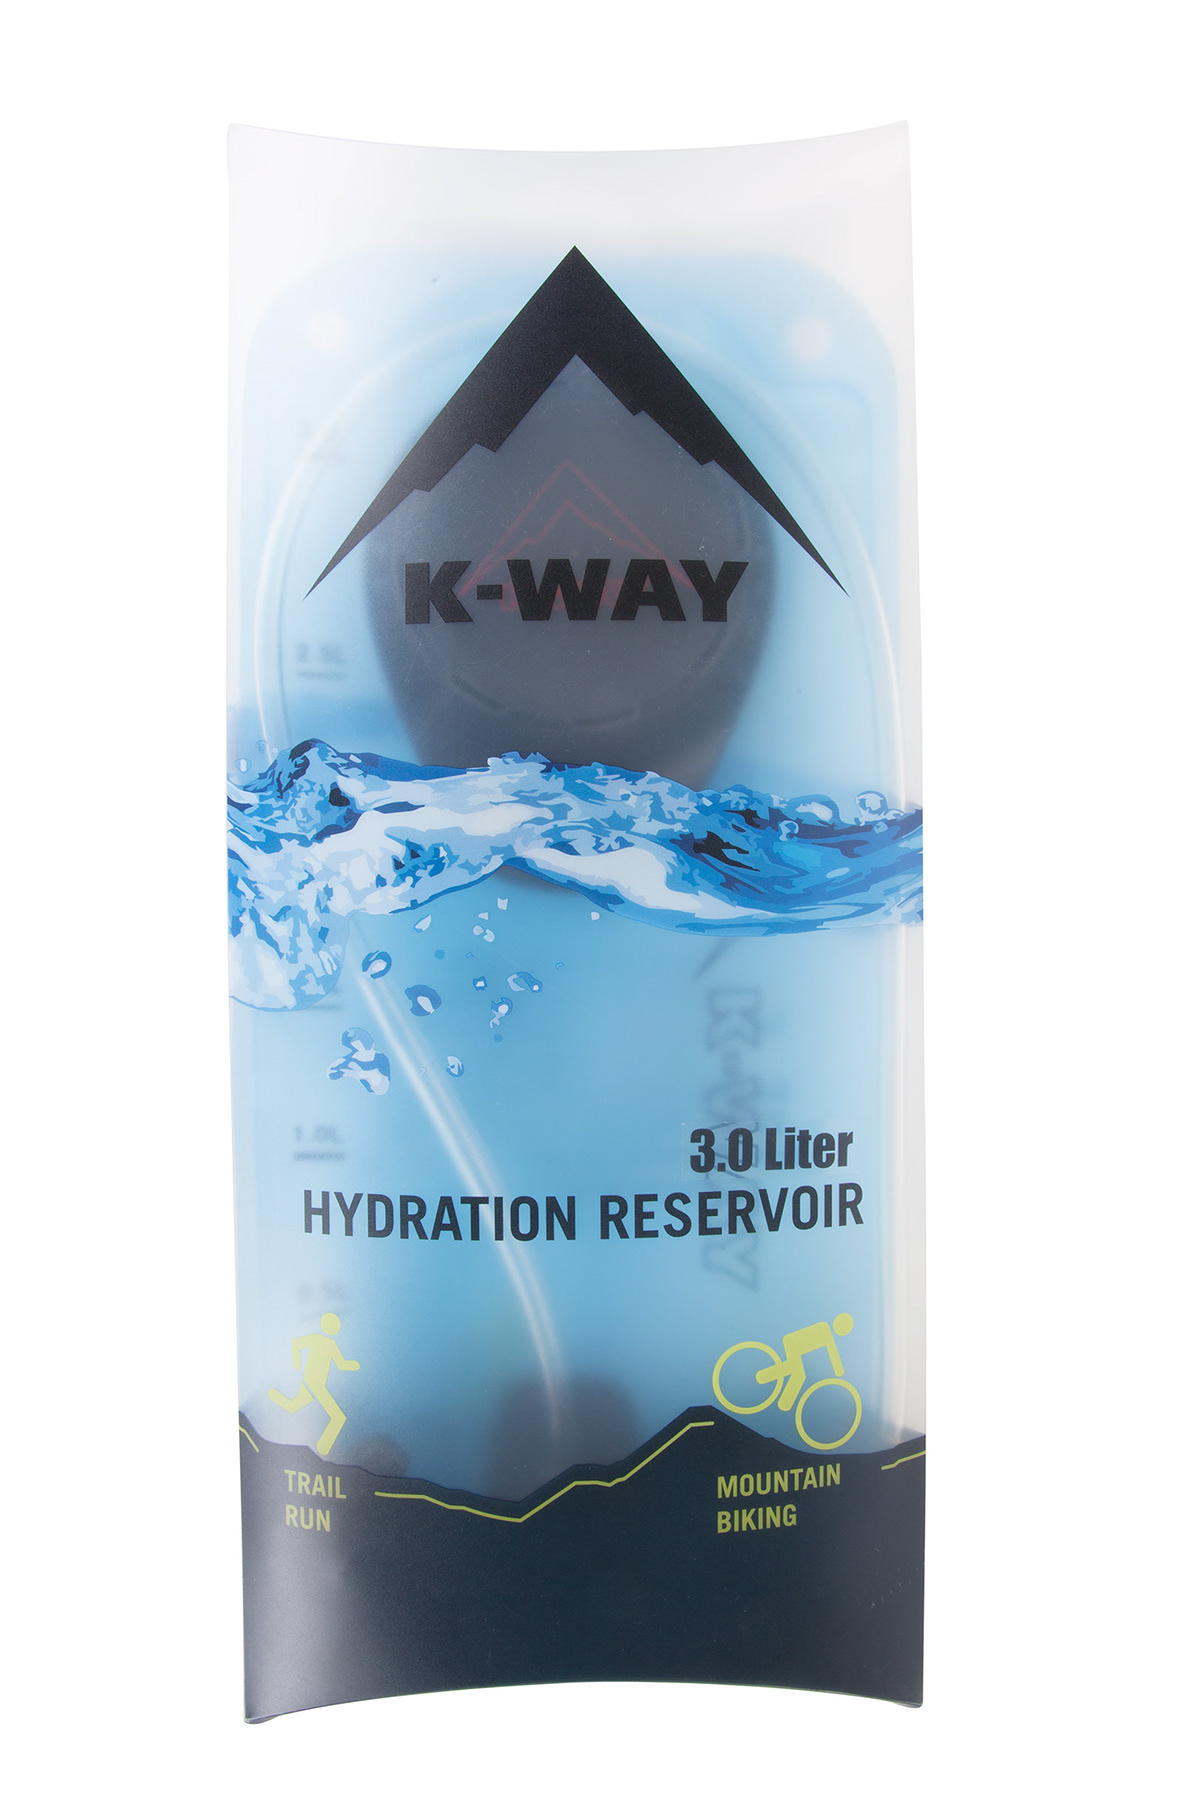 Hydration water reservoir Multisports trail running Cycling hiking